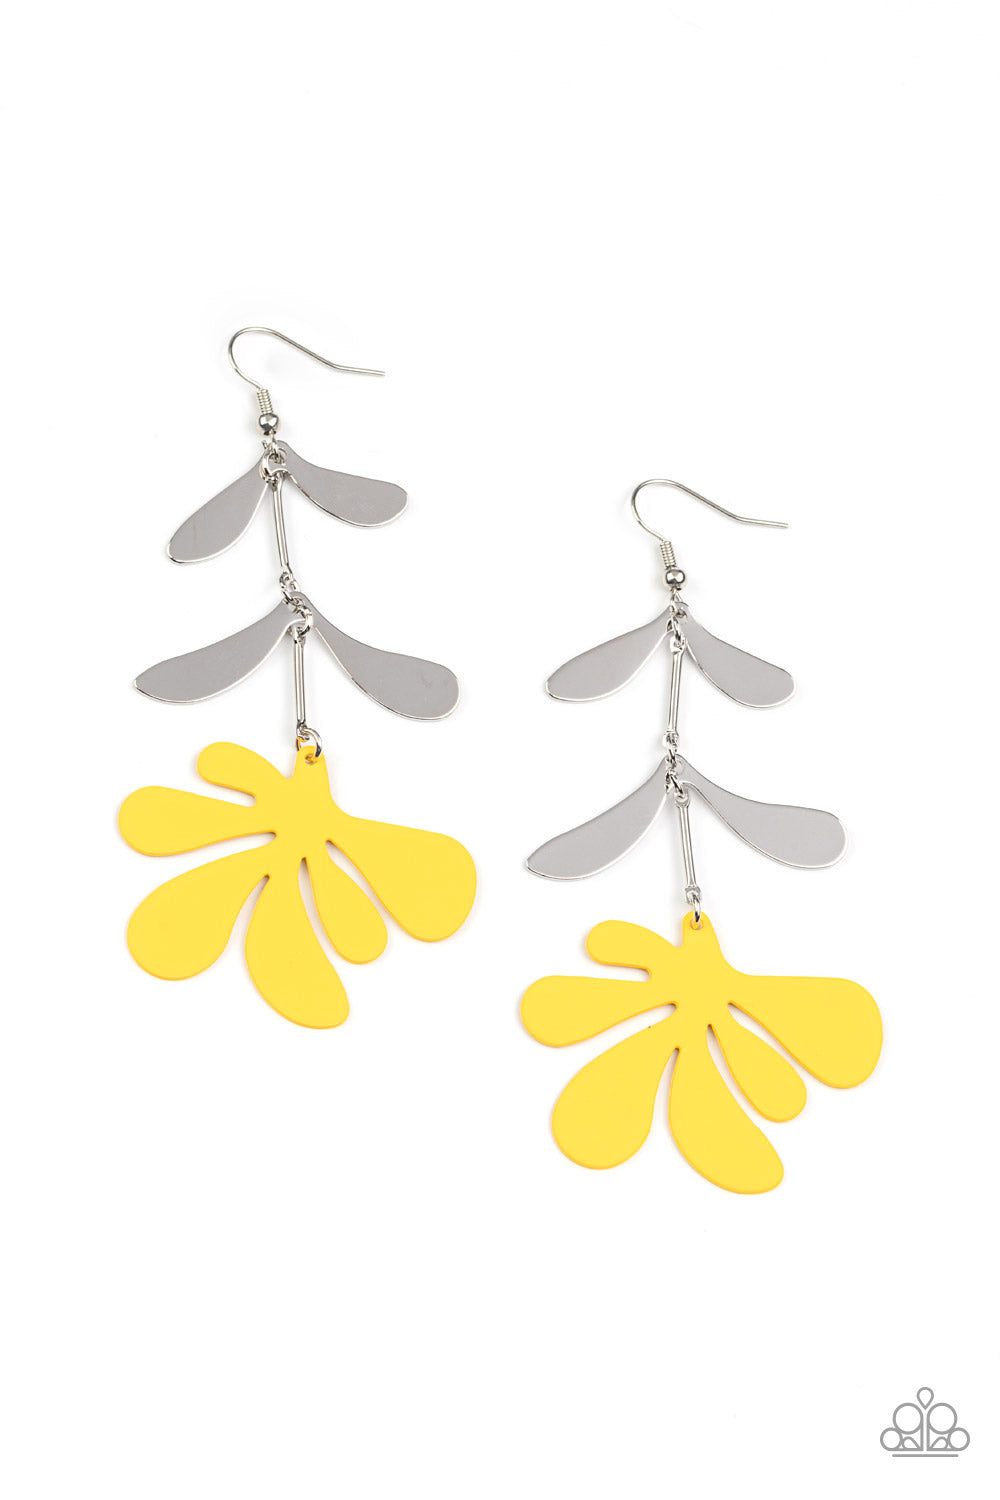 Palm Beach Bonanza Yellow Earring - Paparazzi Accessories  Painted in the lively Pantone® of Primrose, a fun metal palm leaf cut-out sways below two fanciful silver leaves separated by simple silver rods for a whimsical lure. Earring attaches to a standard fishhook fitting.  Sold as one pair of earrings.